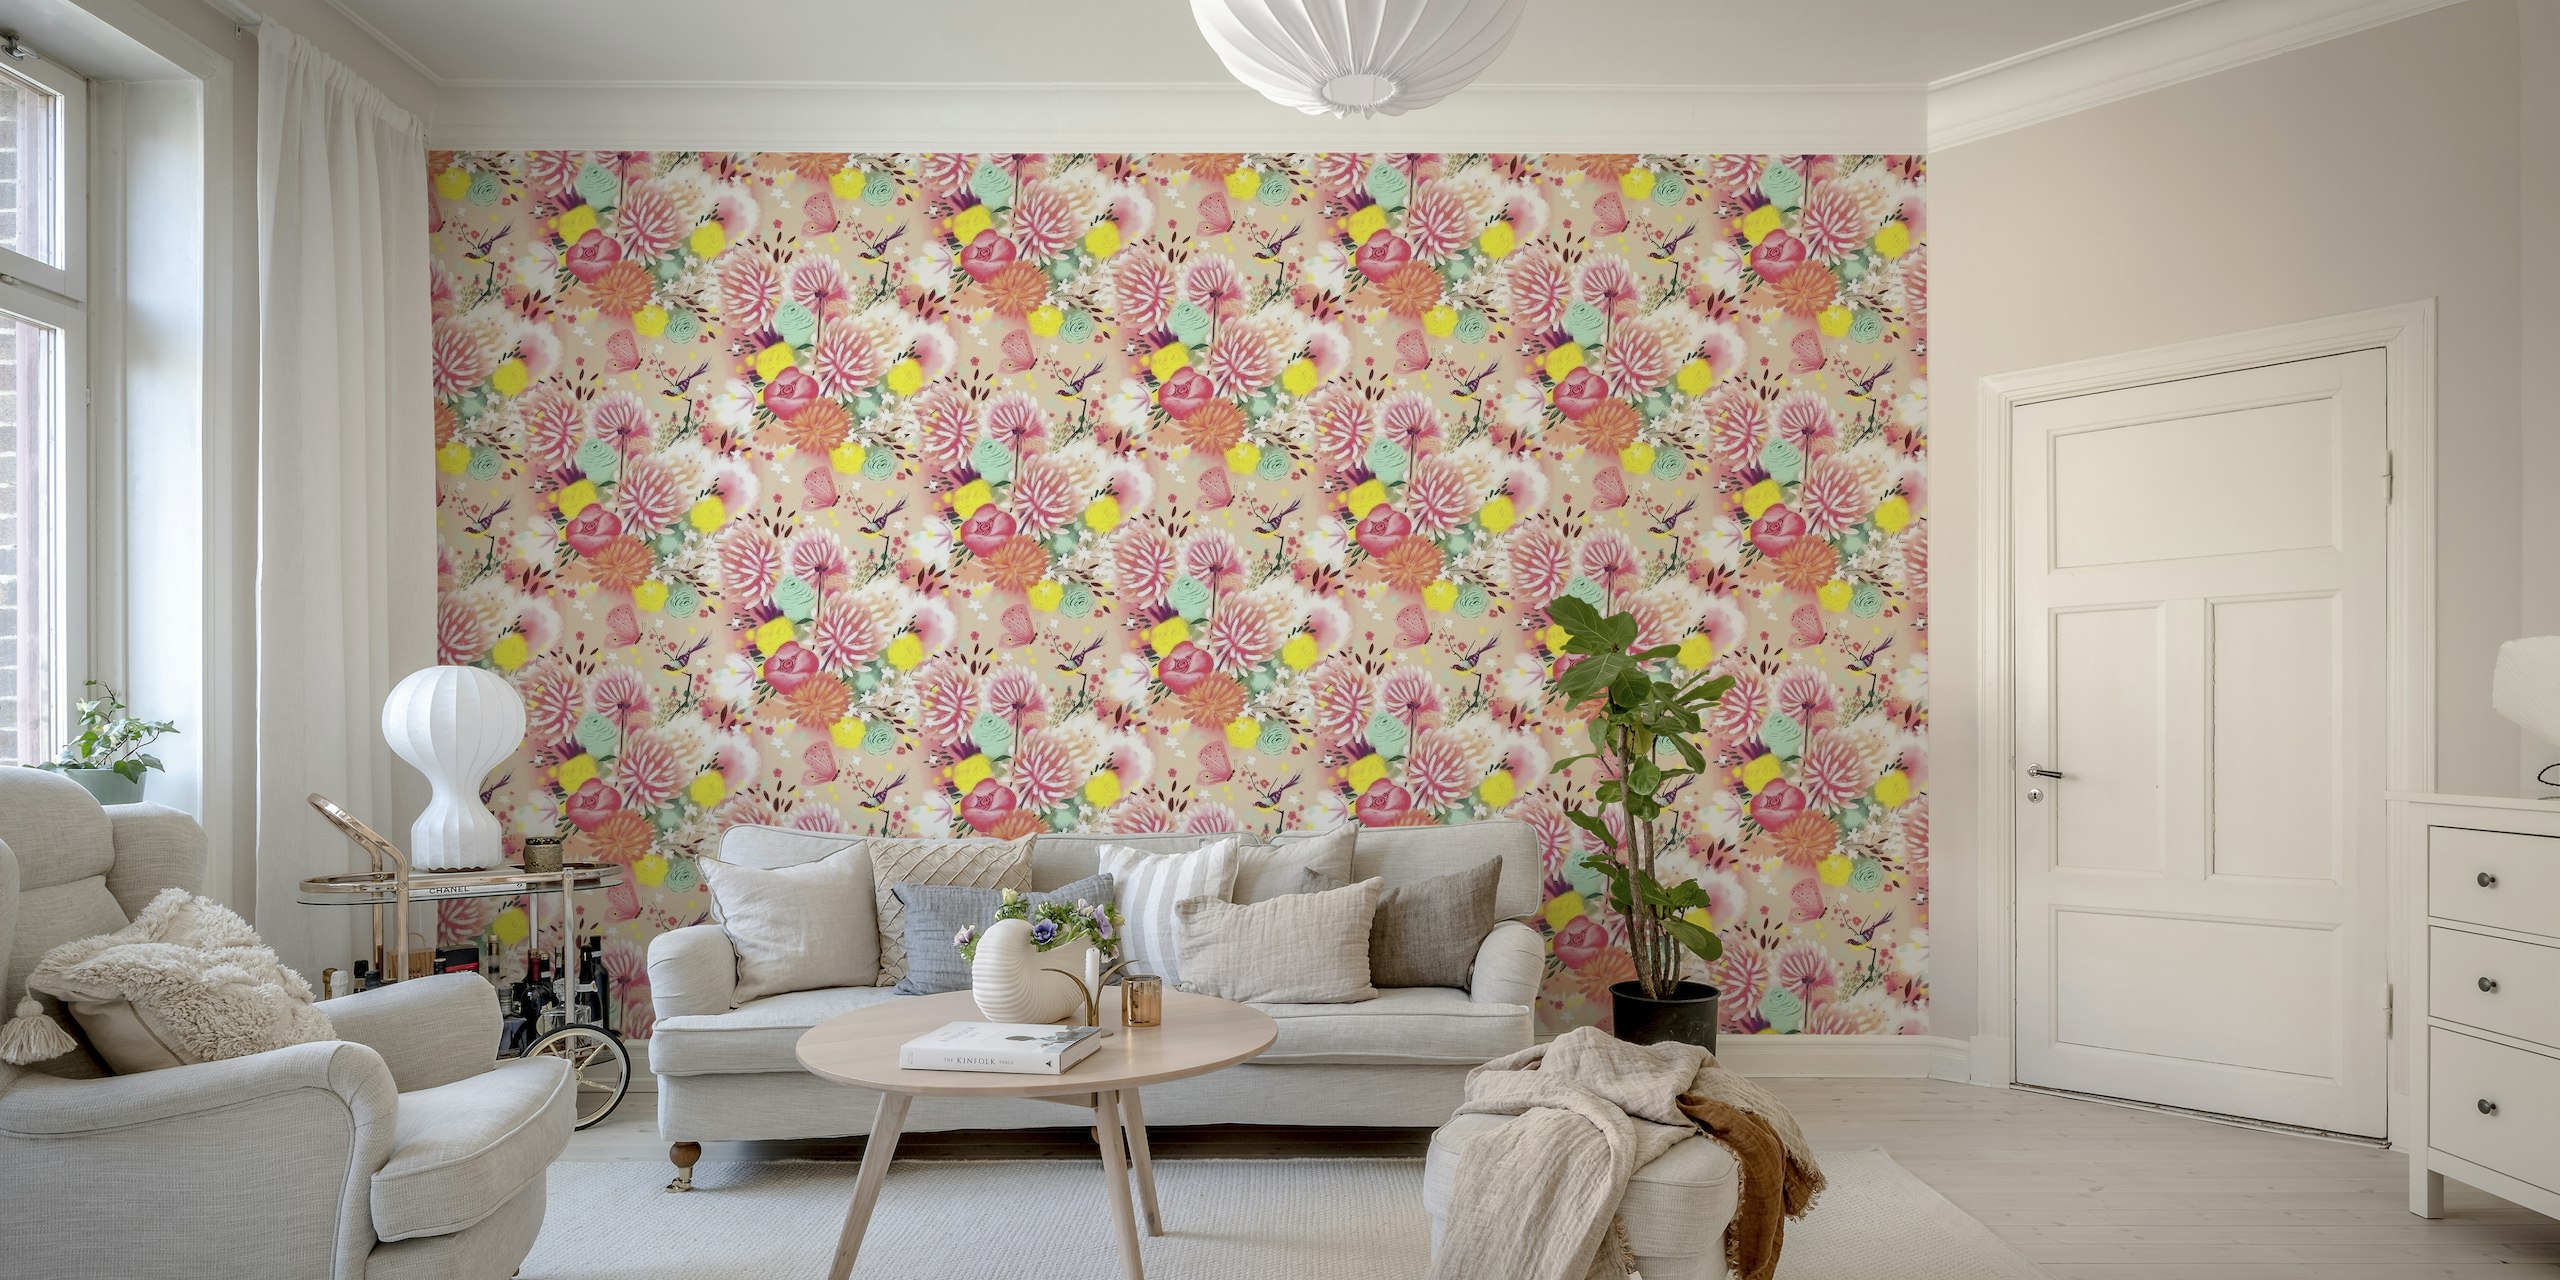 Decorative wall mural featuring soft spring flowers in pastel colors with a gentle butterfly.